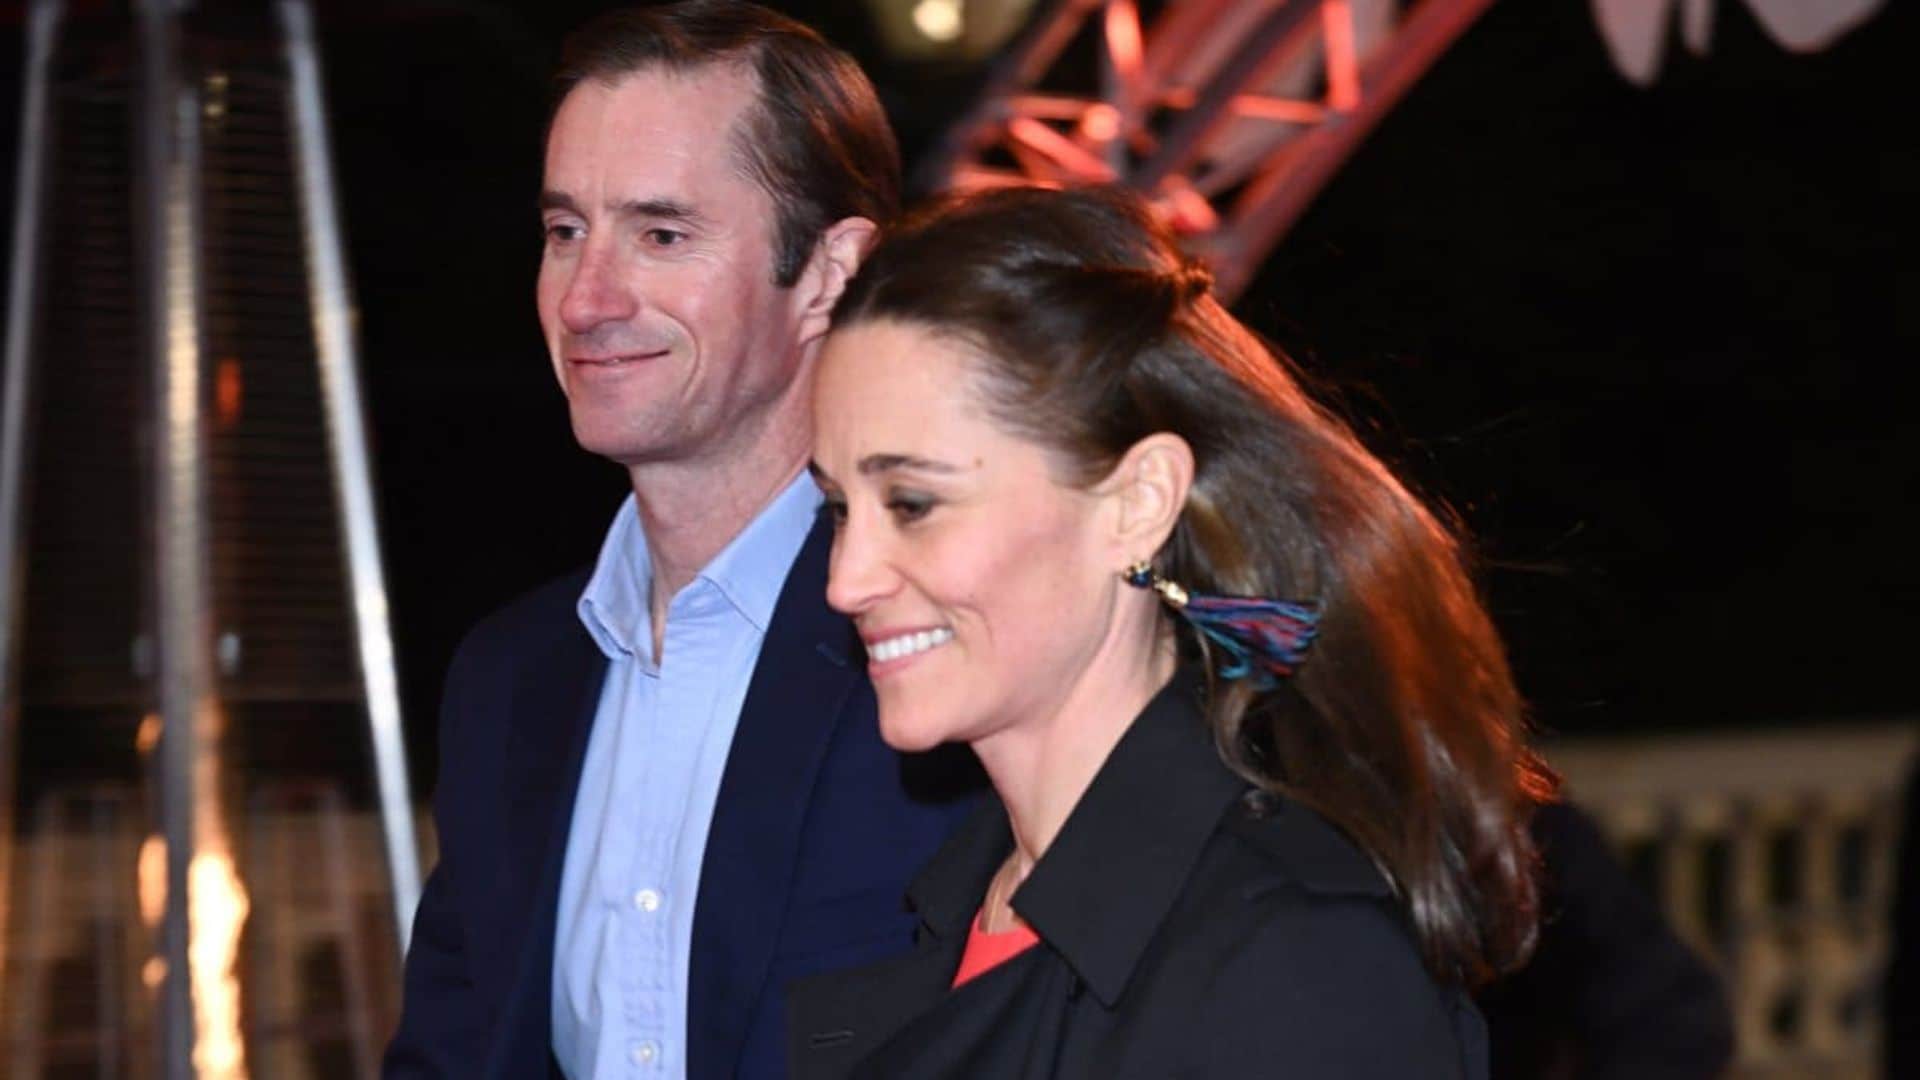 Pippa Middleton and husband make rare public appearance at Cirque du Soleil show